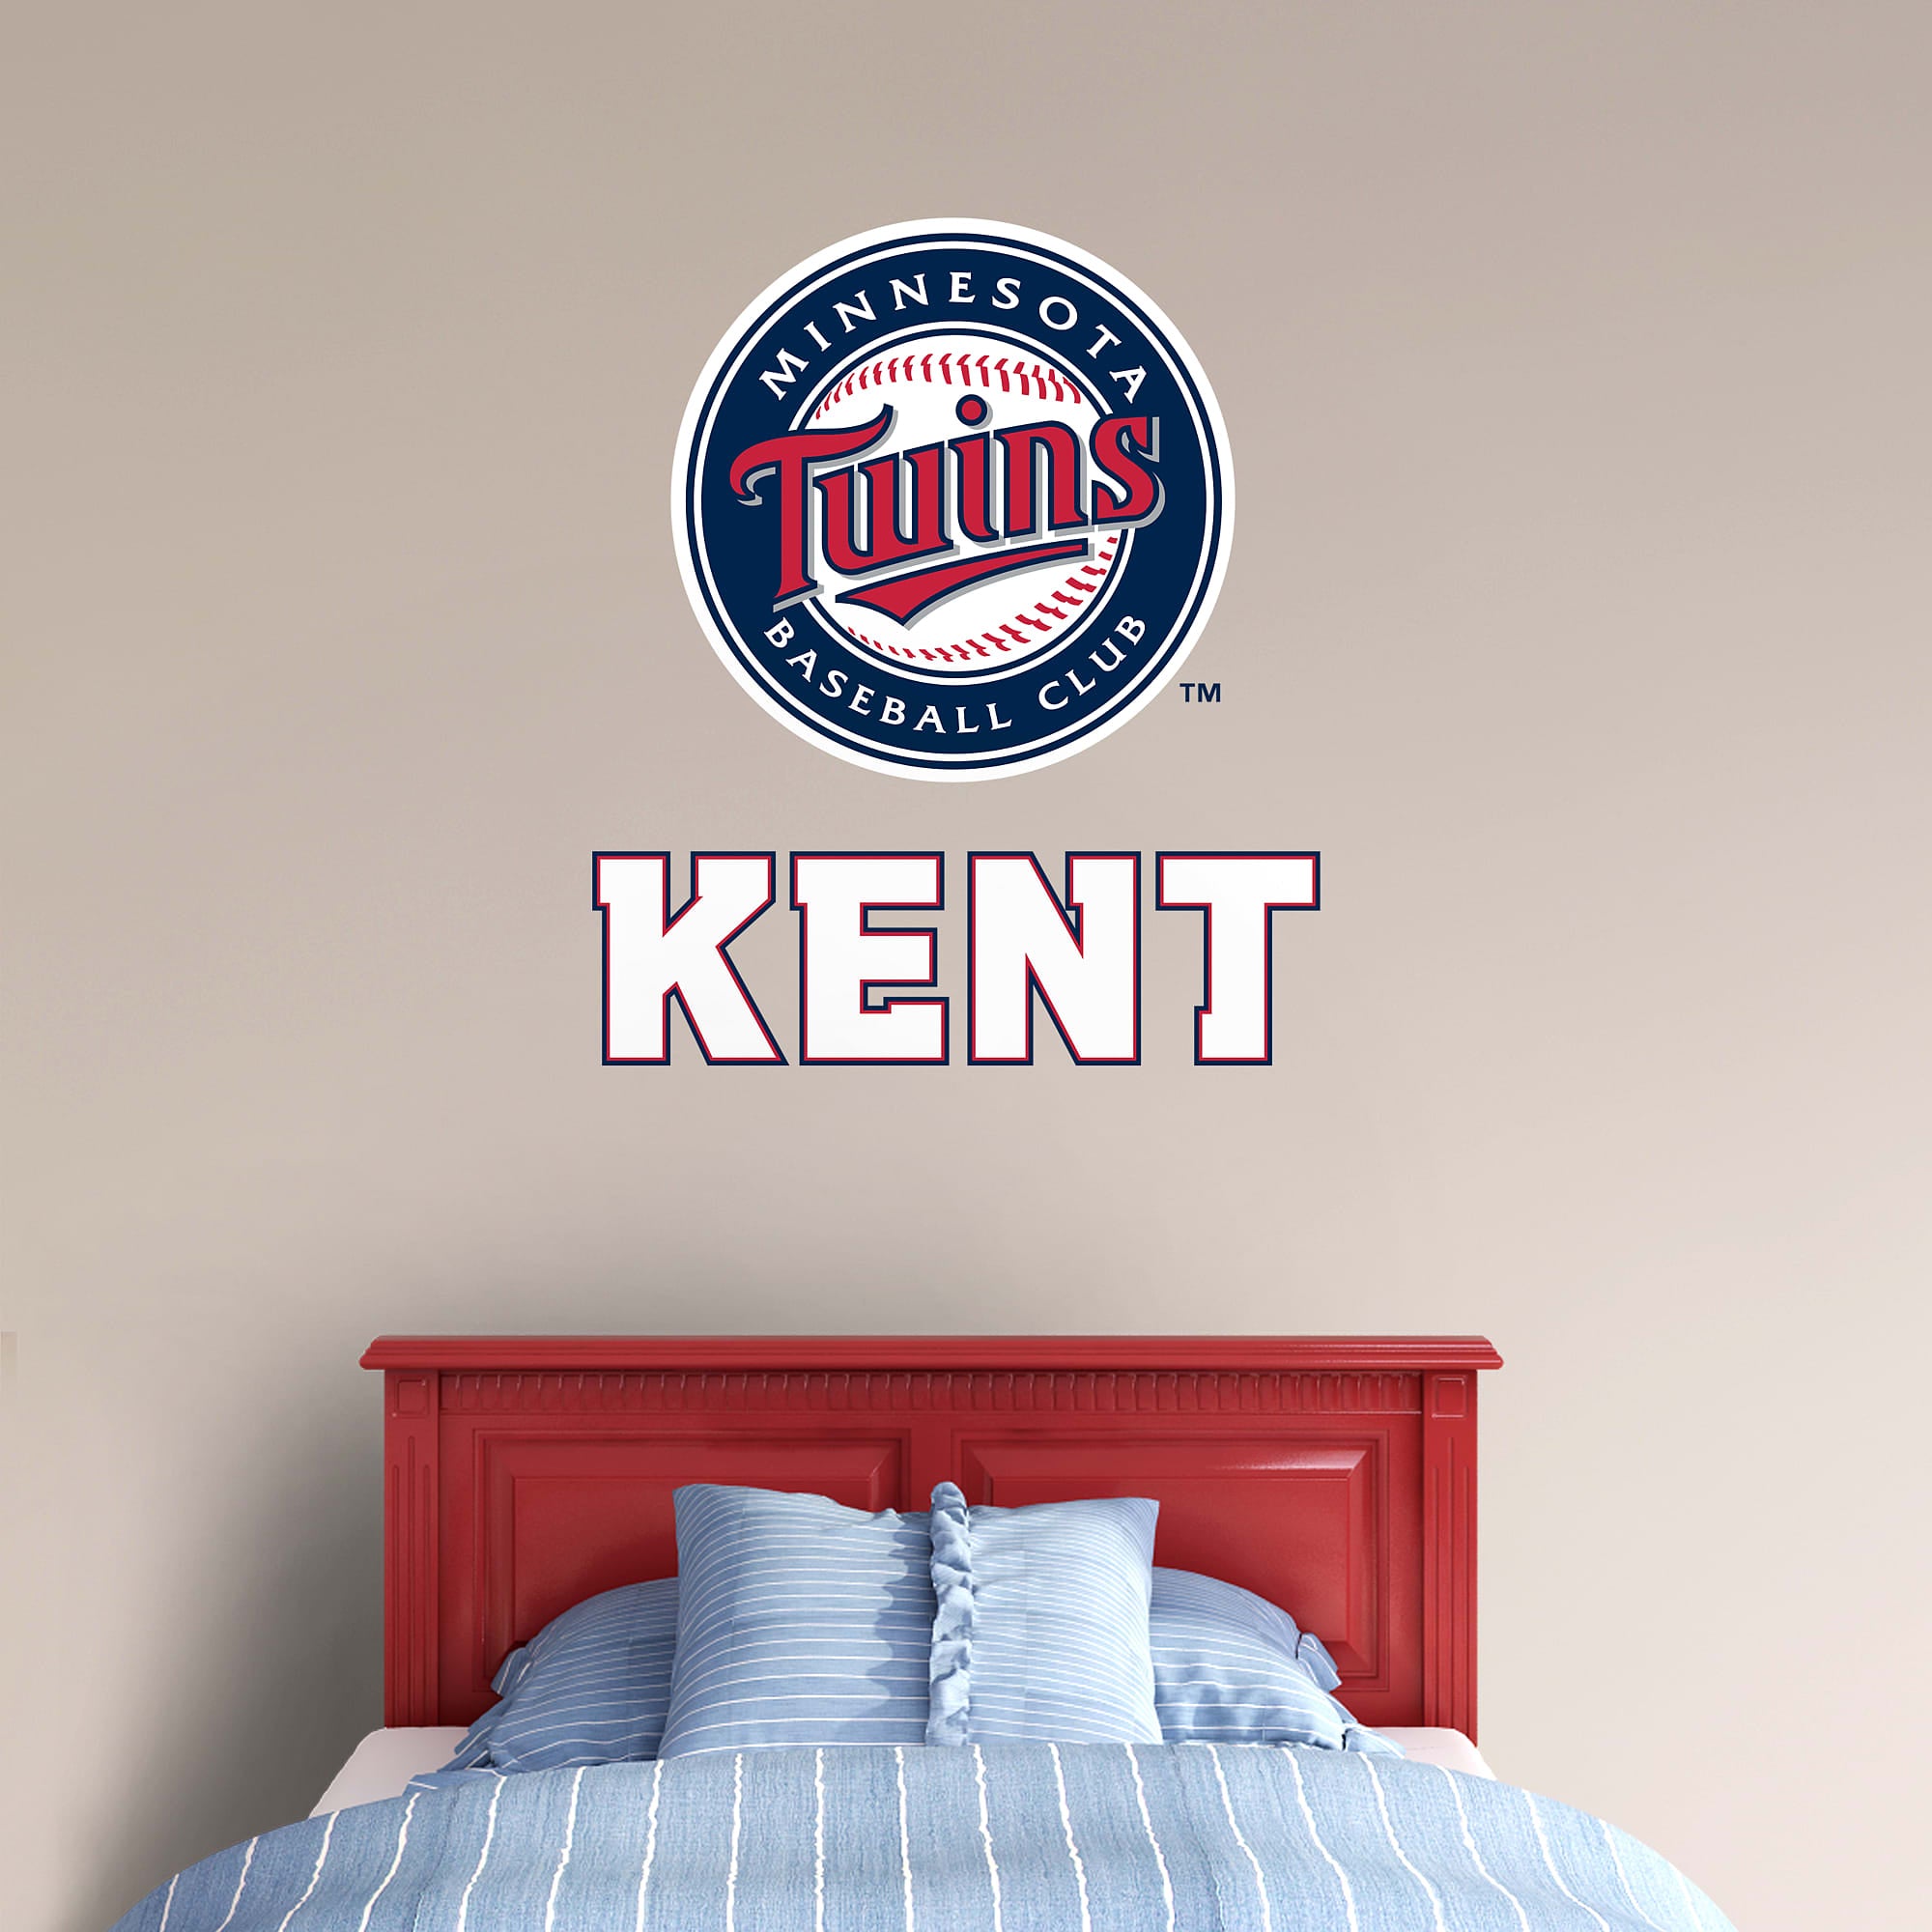 Minnesota Twins: Stacked Personalized Name - Officially Licensed MLB Transfer Decal in White (52"W x 39.5"H) by Fathead | Vinyl